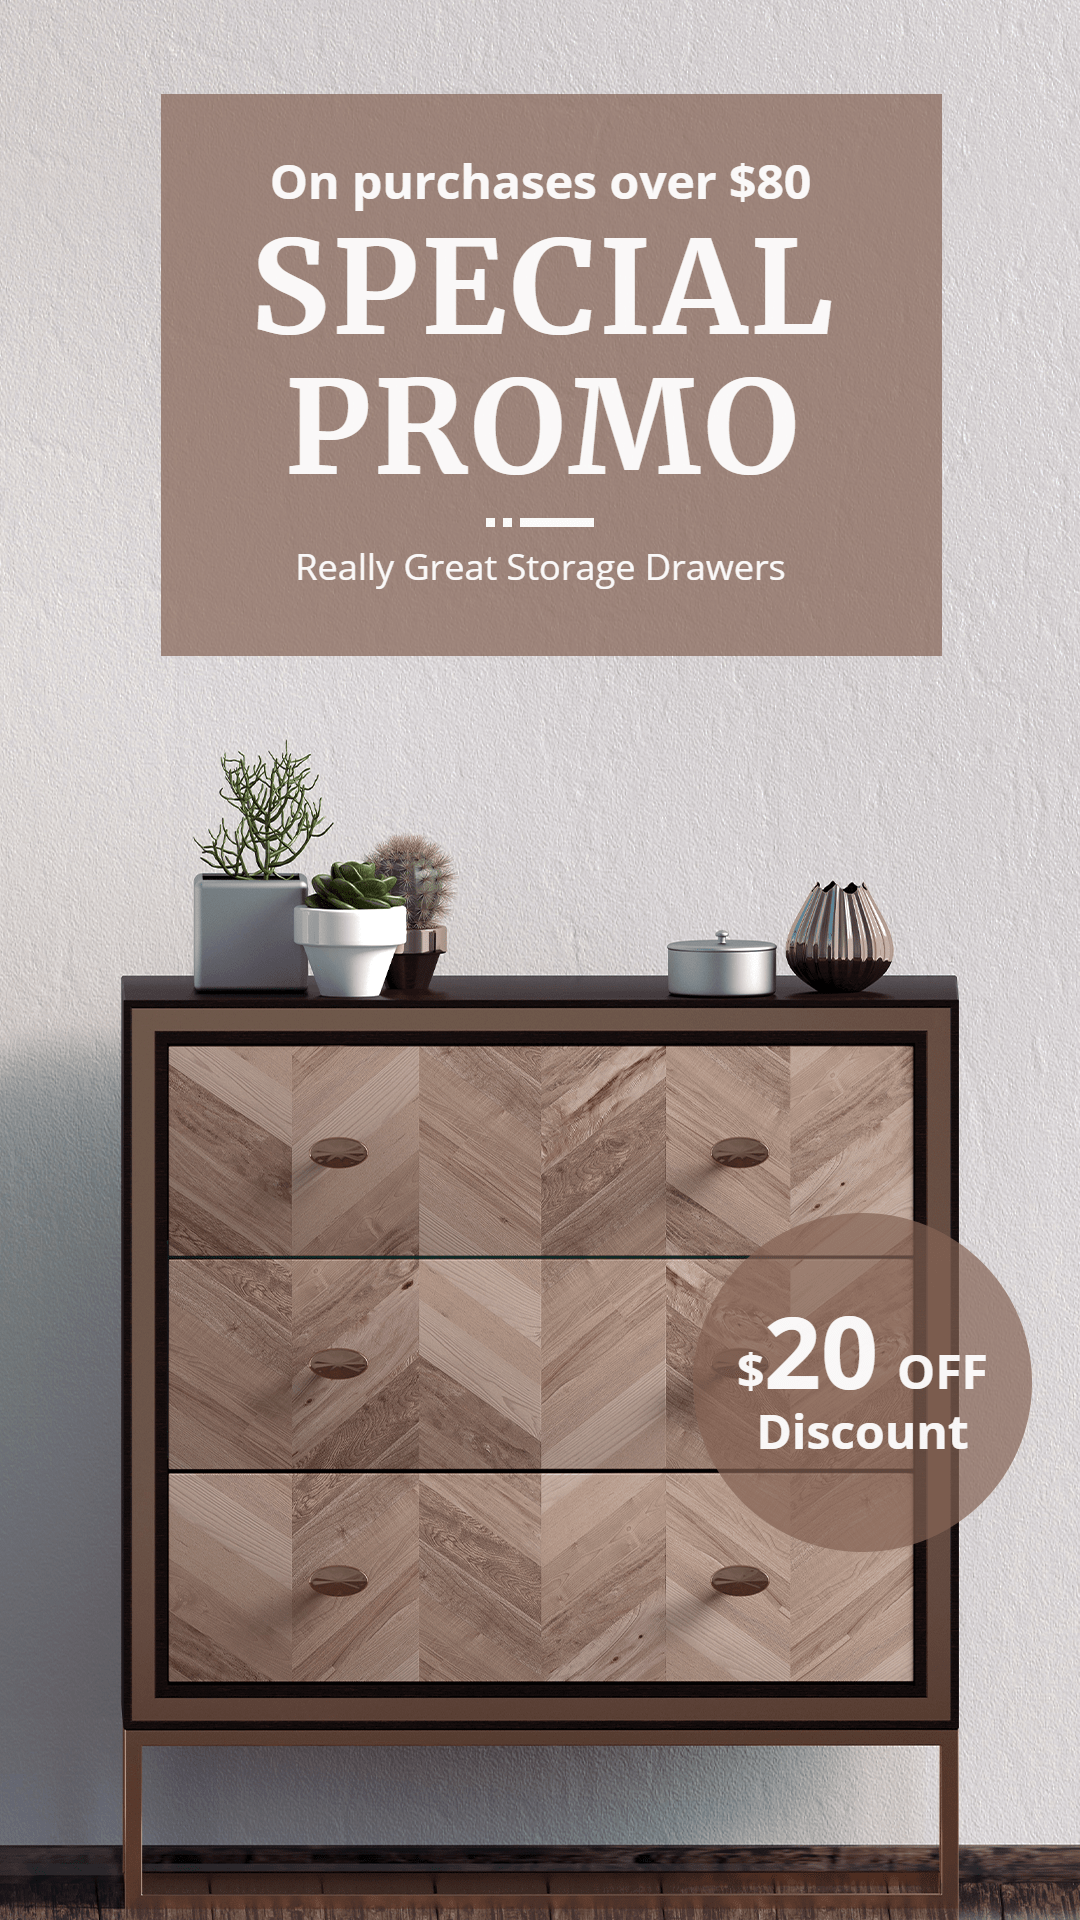 Cabinet Display Storage & Organization Products Sale Promo Ecommerce Story